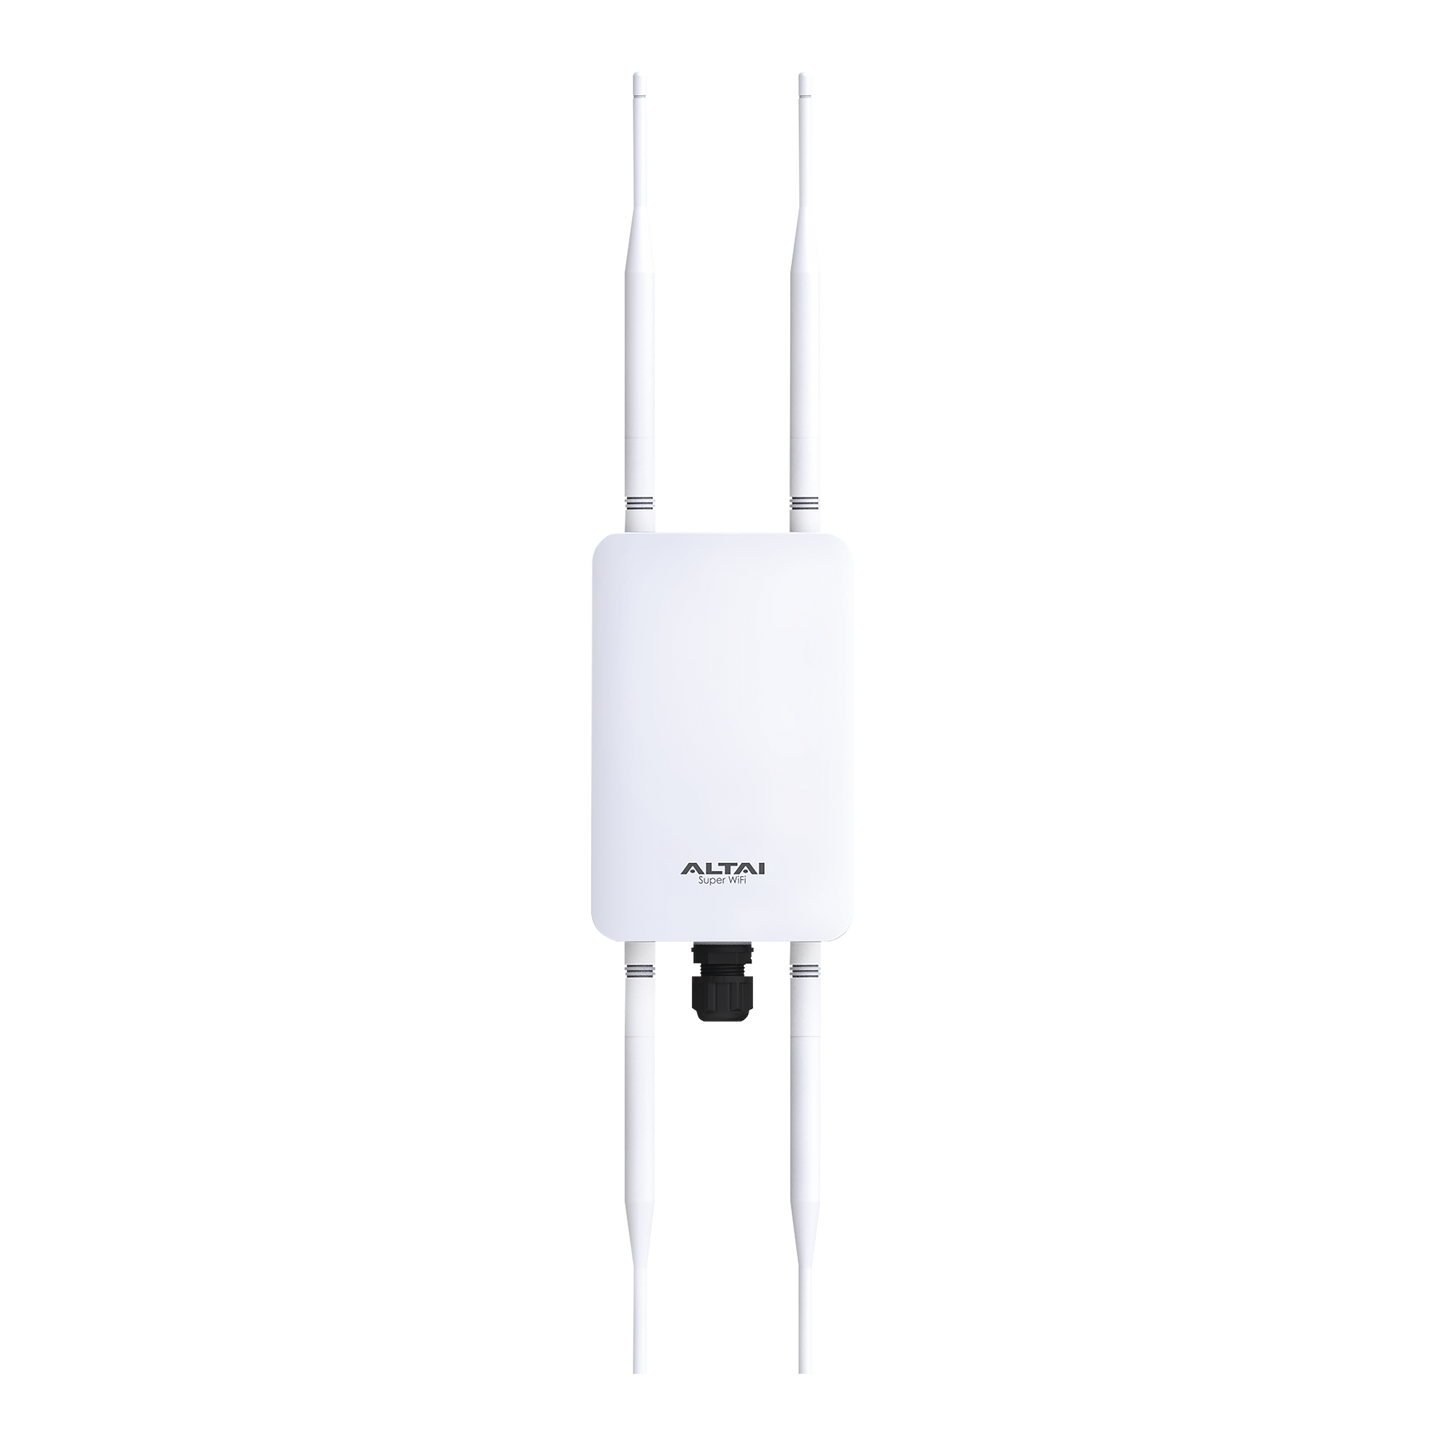 Outdoor Super Wi-Fi Access Point, Wave 2, MU-MIMO, Dual Band 2.4 and 5 GHz, Up to 1267 Mbps, Up to 256 Concurrent Users, IP67 Housing